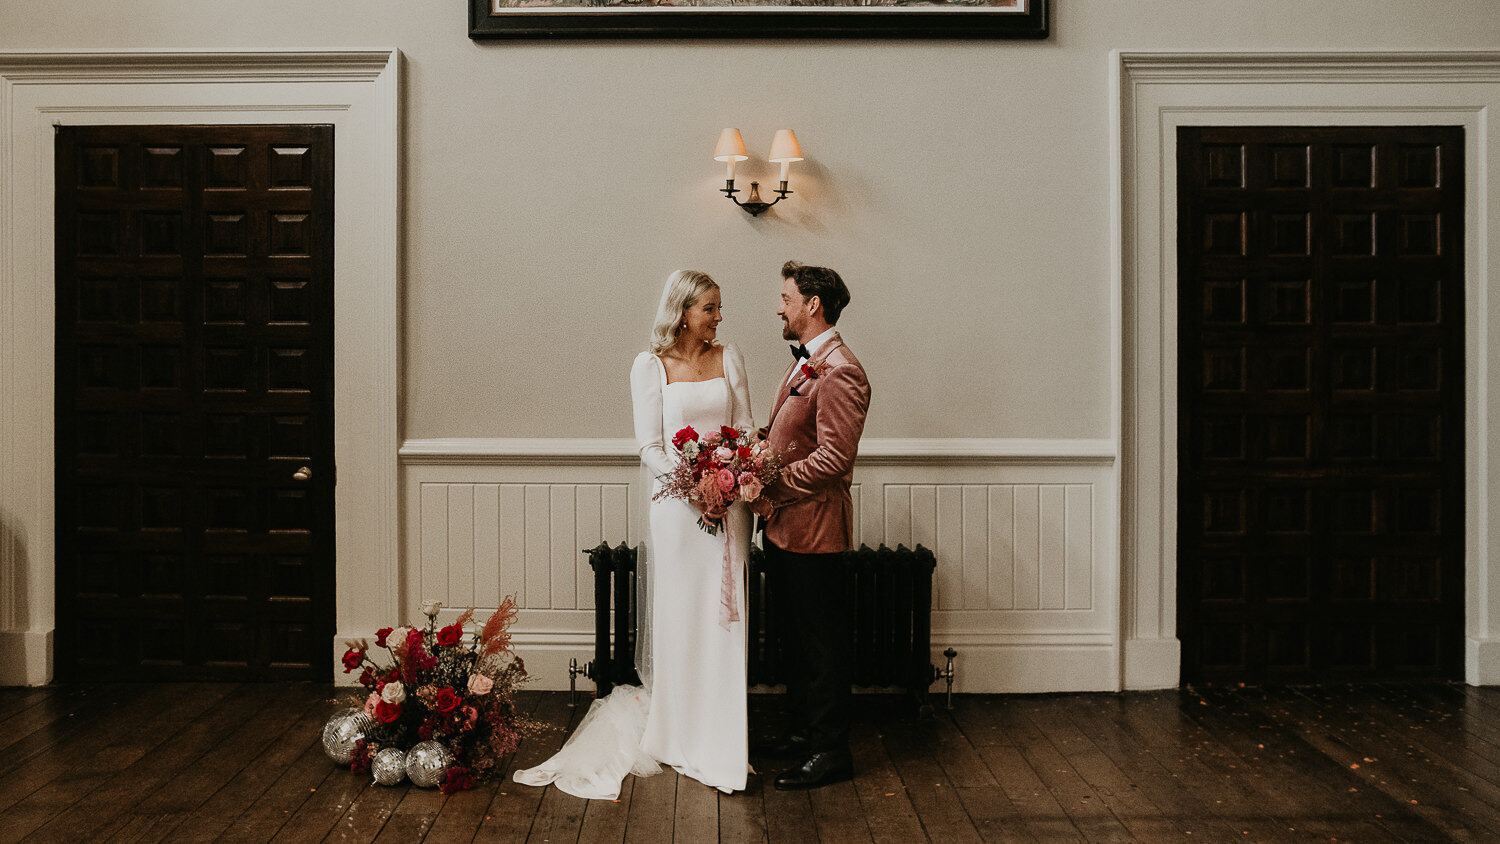 A wedding couple stand in the ceremony room of Elmore Court next to some pink wedding flowers.